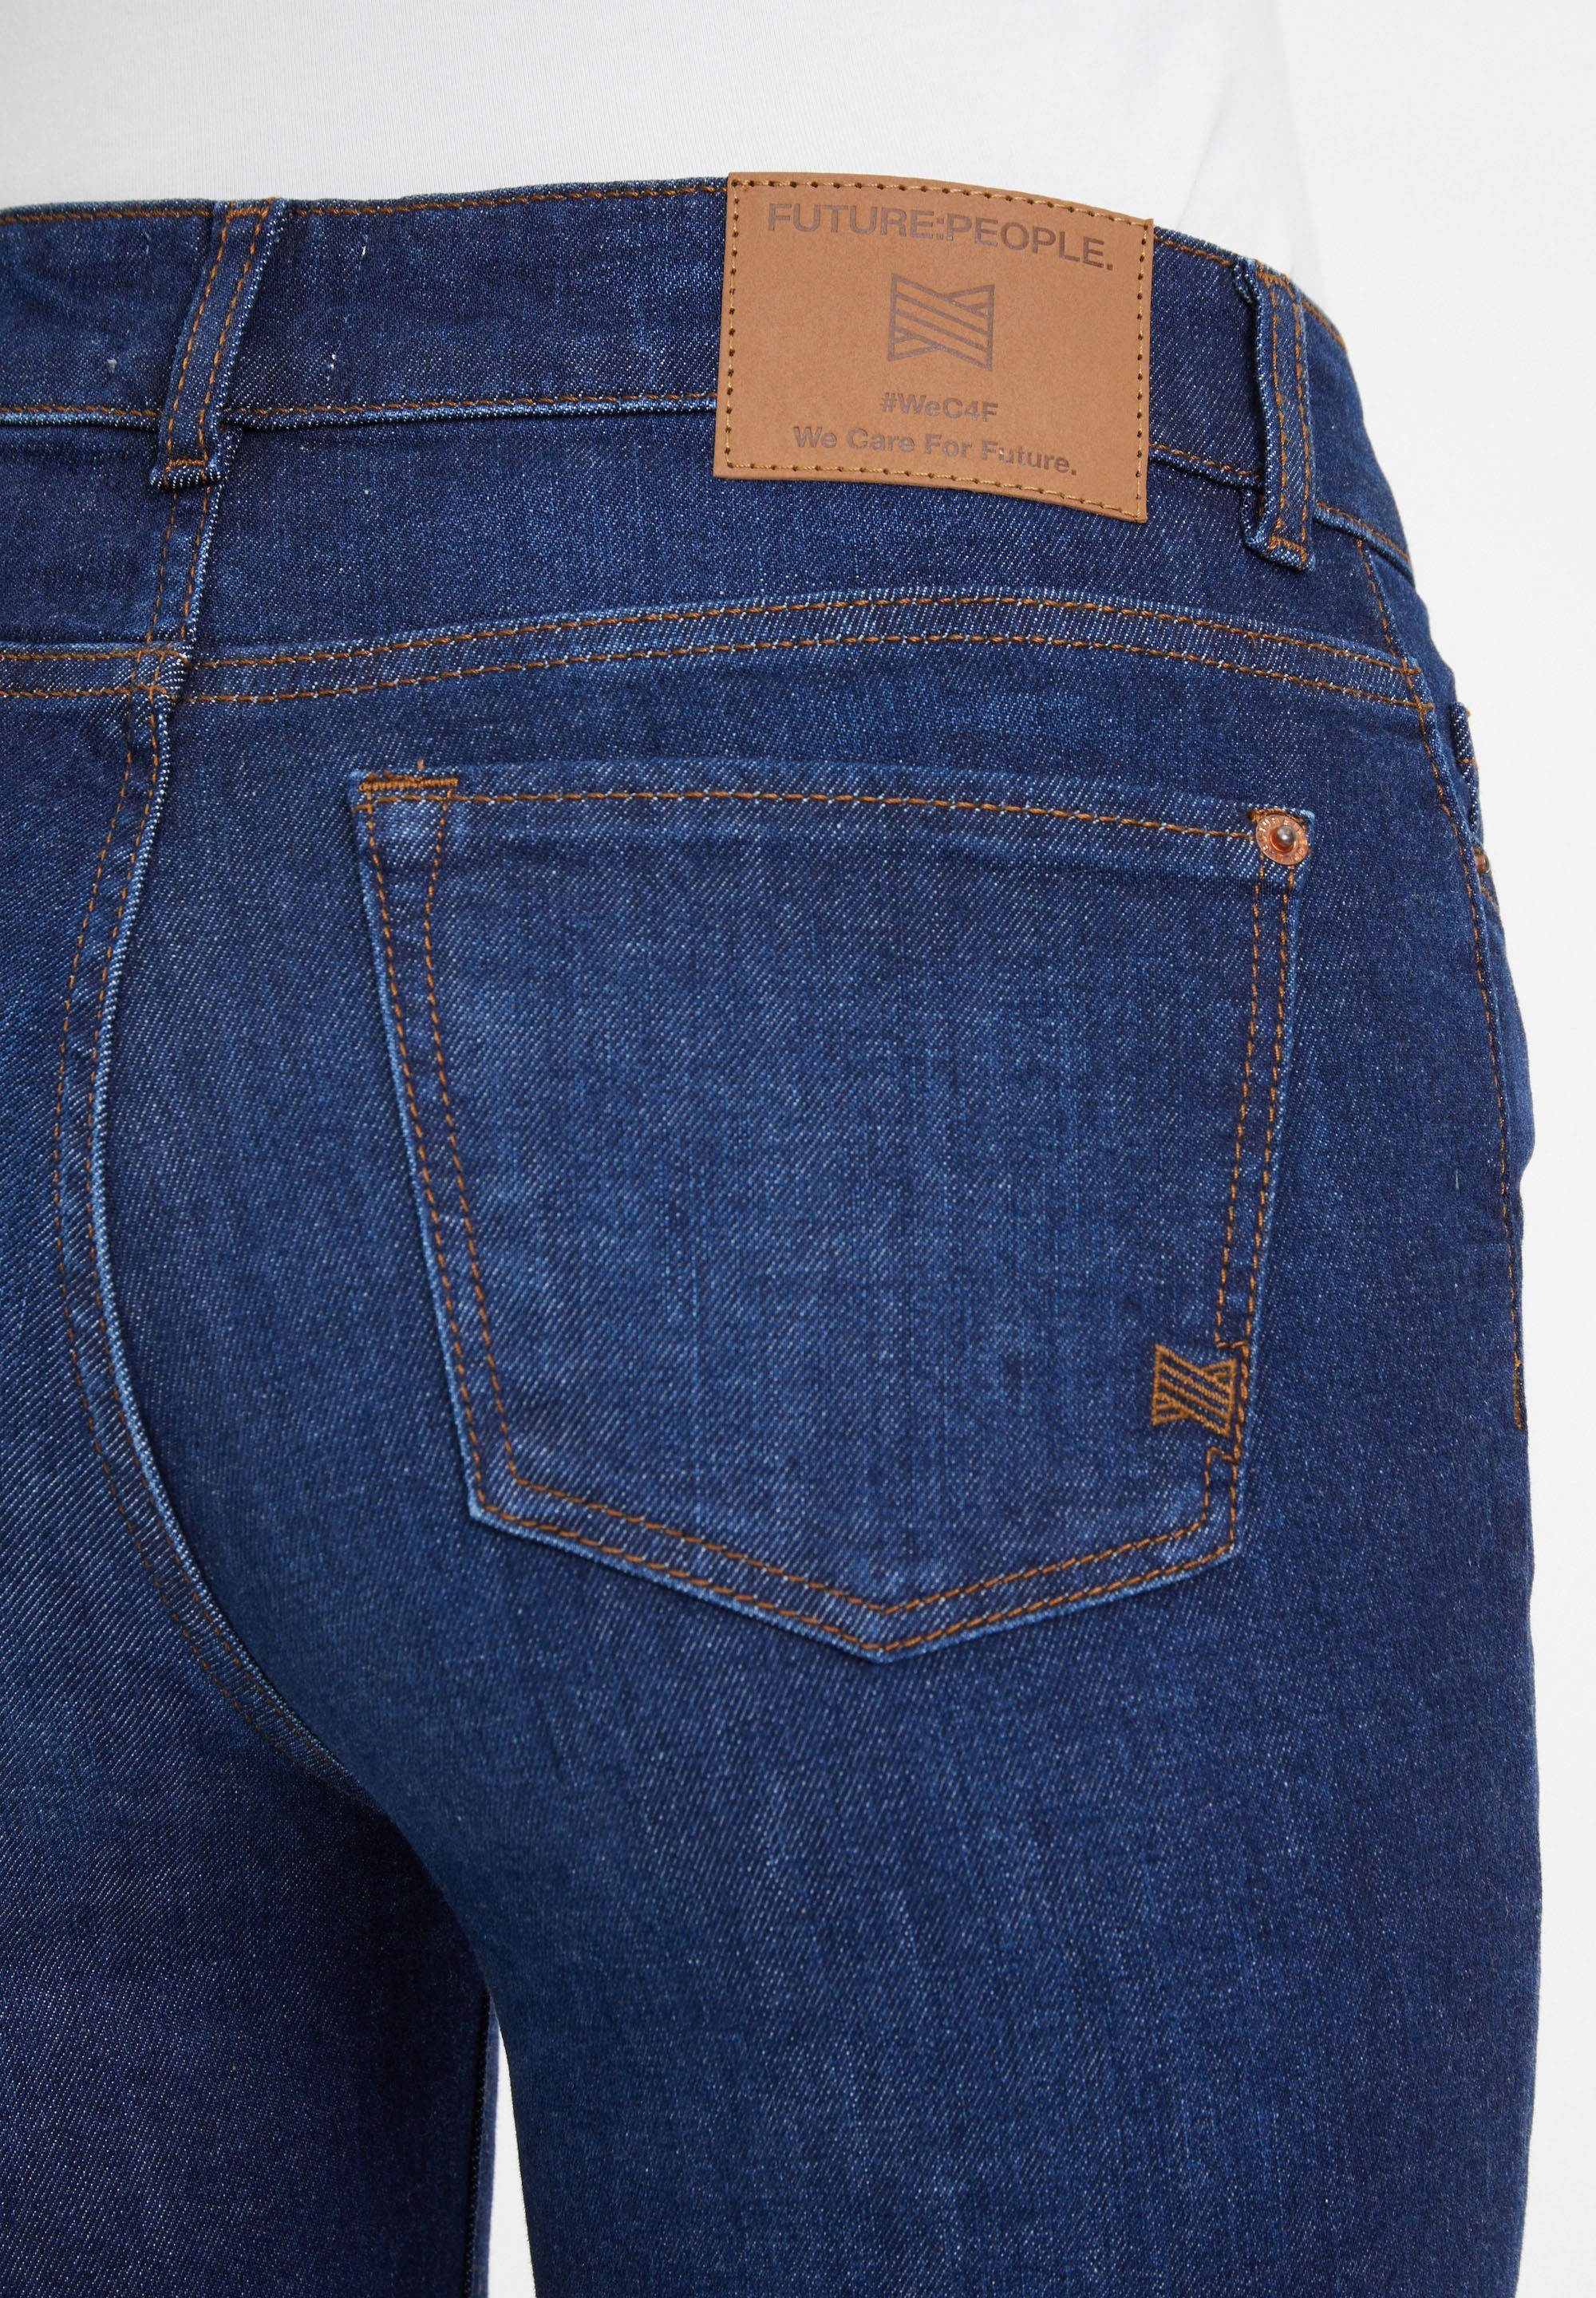 WAIST We Slim-fit-Jeans for #WeC4F AUTHENTIC 01:02 Care FUTURE:PEOPLE. USED BOOTCUT - MID DARK Future. BLUE -